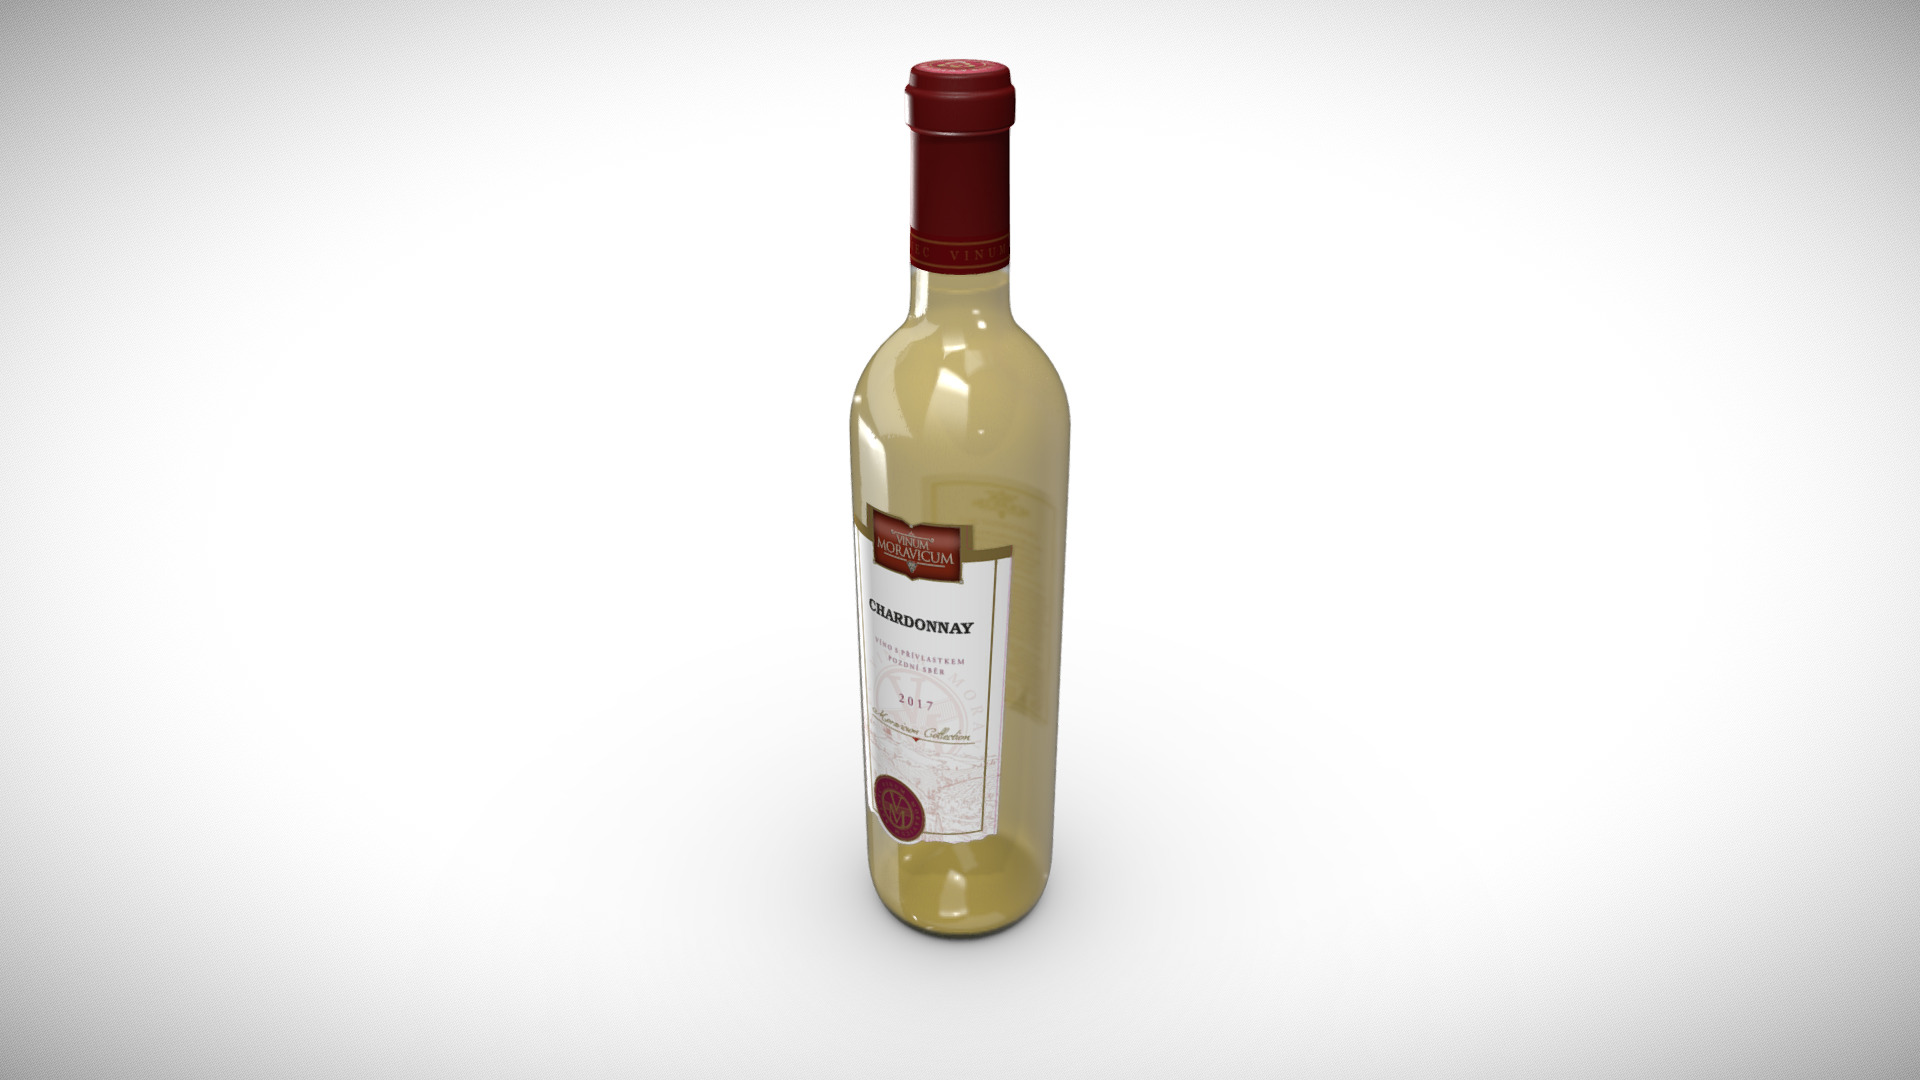 3D model Bottle of Wine Chardonnay 2017 - This is a 3D model of the Bottle of Wine Chardonnay 2017. The 3D model is about a bottle of alcohol.